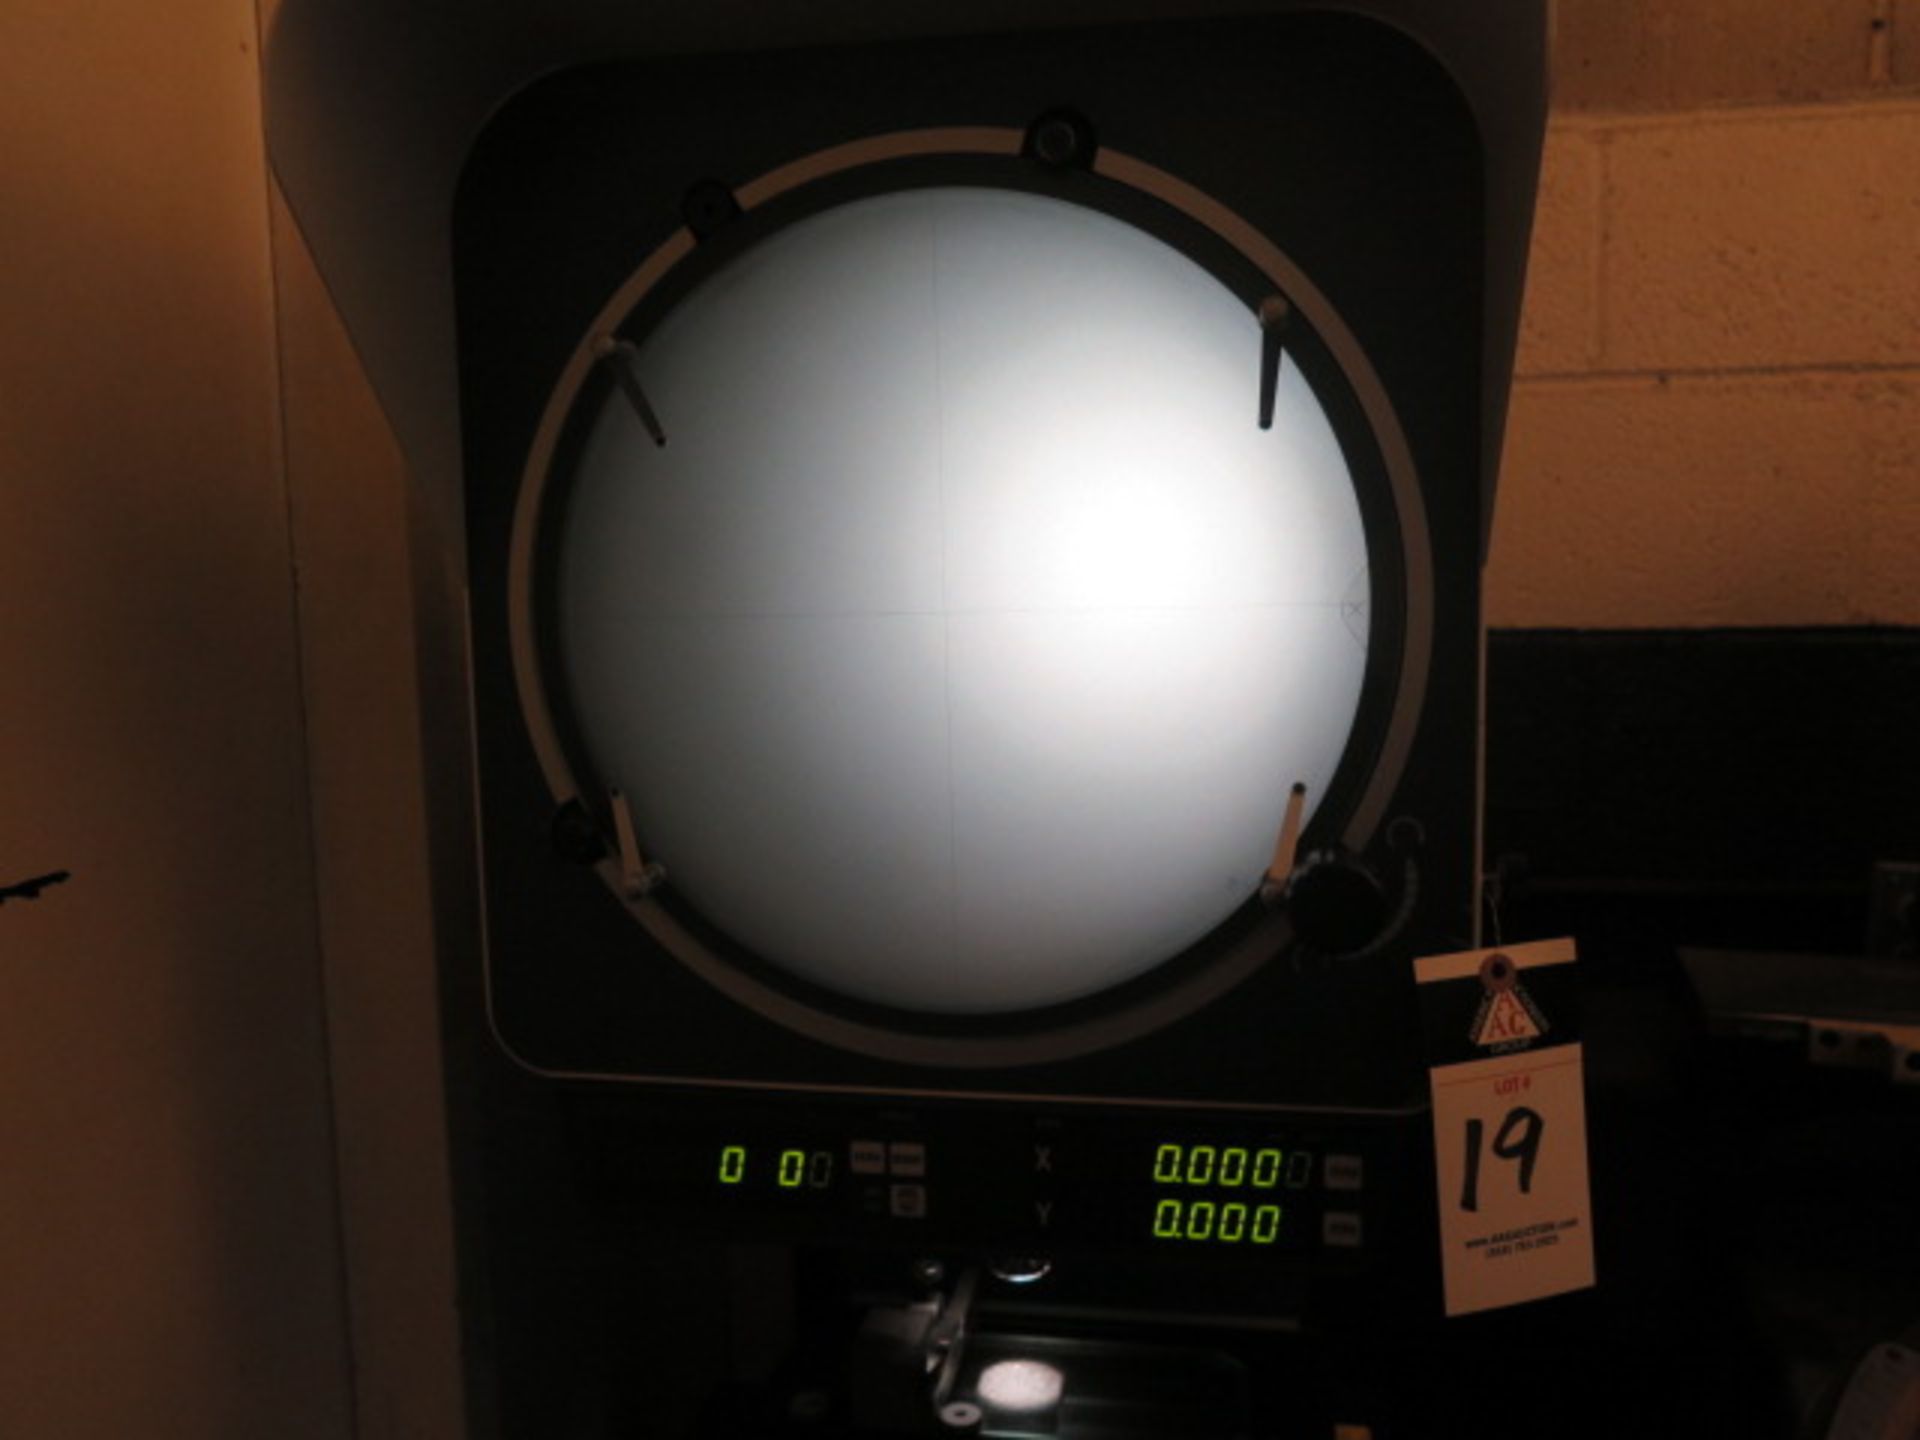 Mitutoyo PJ-A3000 12” Optical Comparator s/n 480111 w/ Digital “X” – “Y” and Angular Readouts, - Image 4 of 9